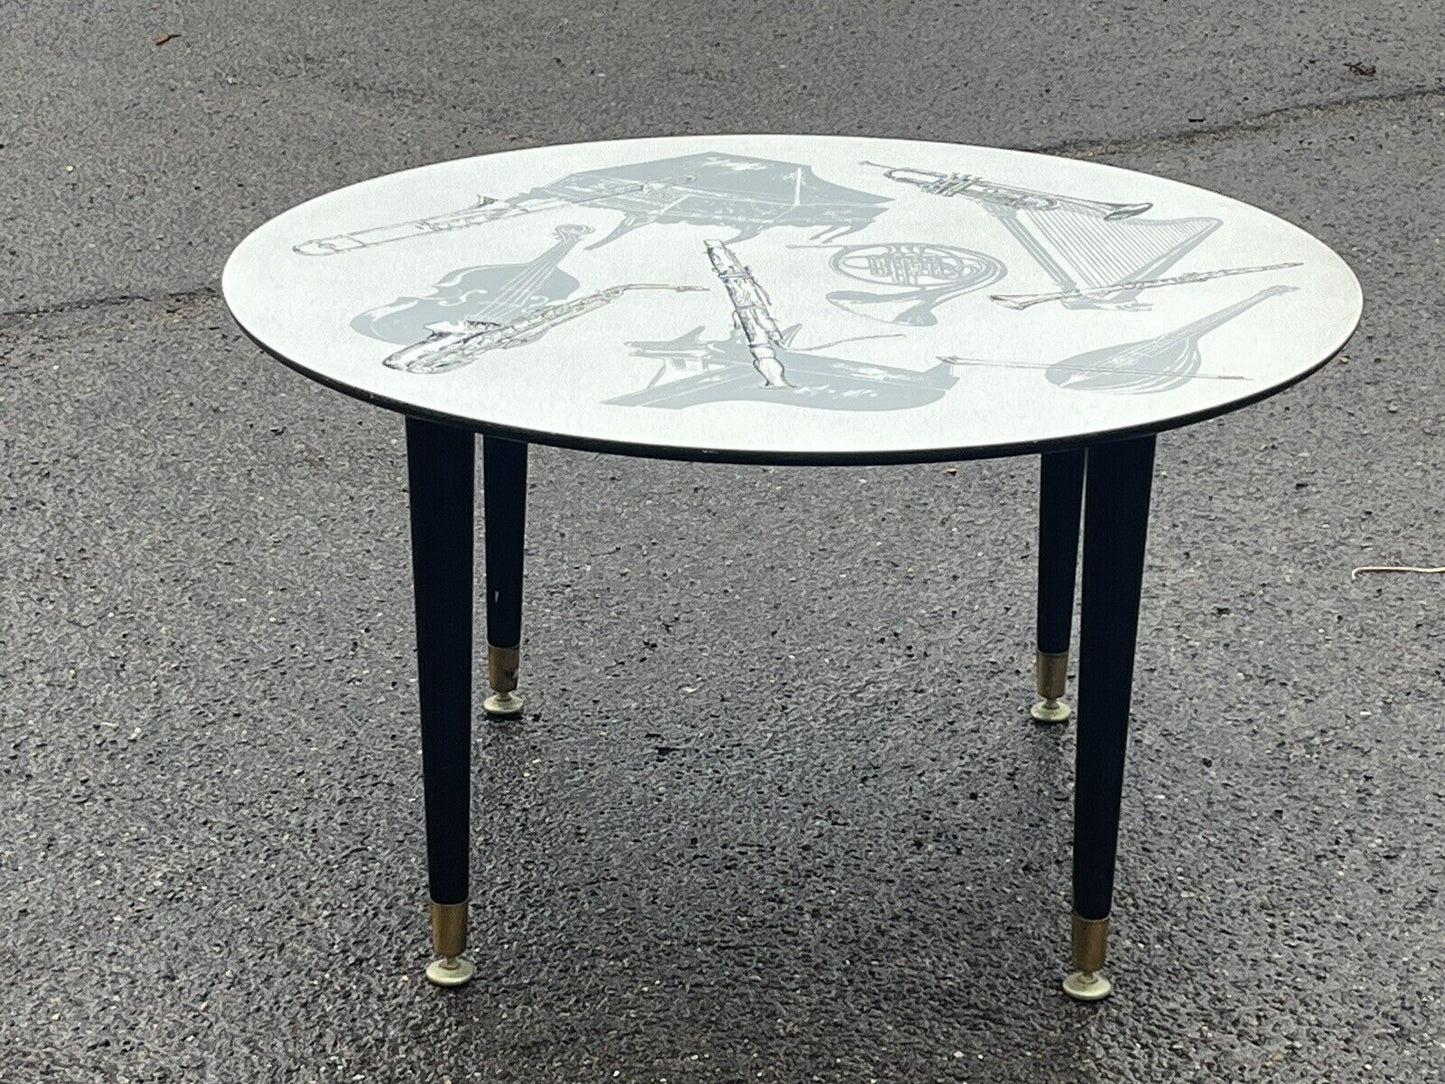 1960’s Coffee Table. Top Decorated With Musical Instruments.